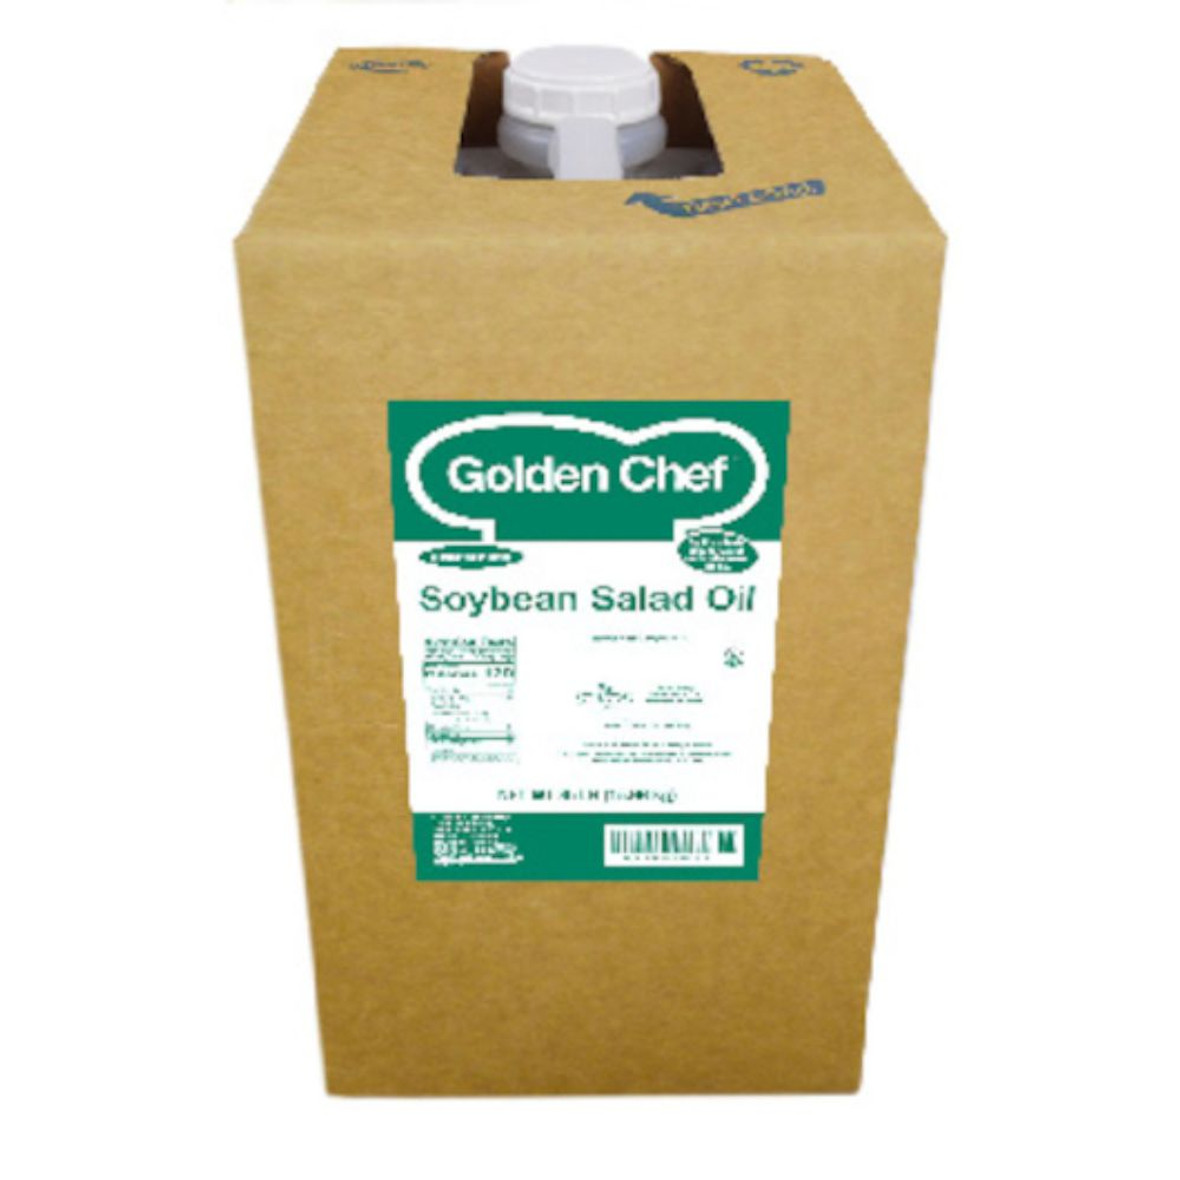 Golden Chef Soybean Salad Oil, 35 Pounds